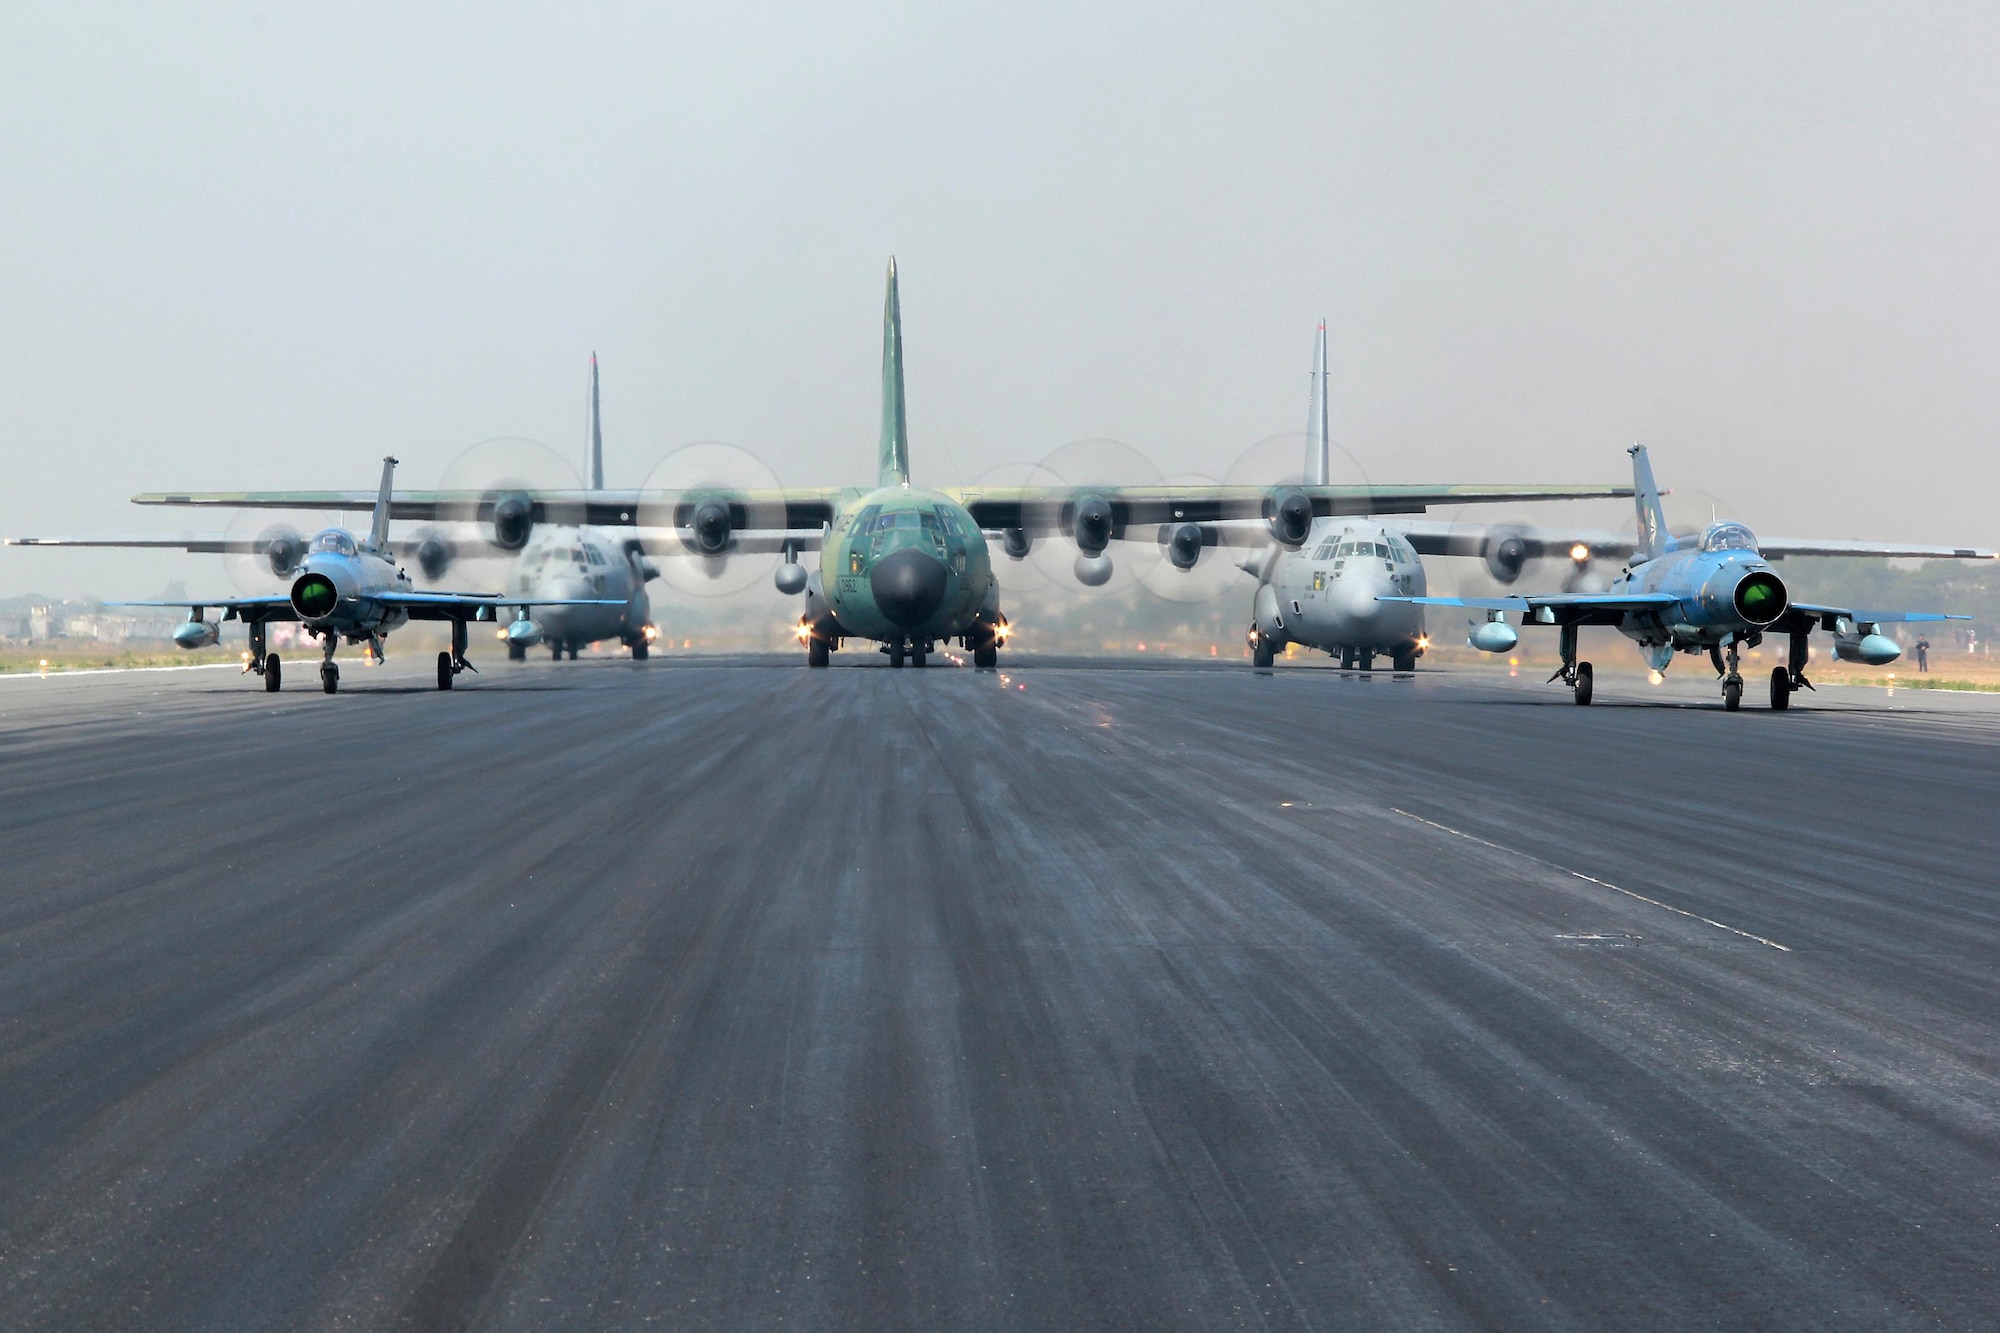 Two Bangladesh F-7BG Defenders, a BAF C-130B Hercules, and two U.S. Air Force C-130H Hercules aircraft prepare to take off Jan. 28, 2015, from BAF Base Bangabandhu, Bangladesh, during Cope South 15. The C-130H is assigned to the 374th Airlift Wing at Yokota Air base, Japan; the BAF F-7BGs are assigned to 5th Squadron and the BAF C-130B is assigned to 101st Special Flying Unit at BAF Base Bangabandhu, Bangladesh. (Courtesy photo/Bangladesh air force)